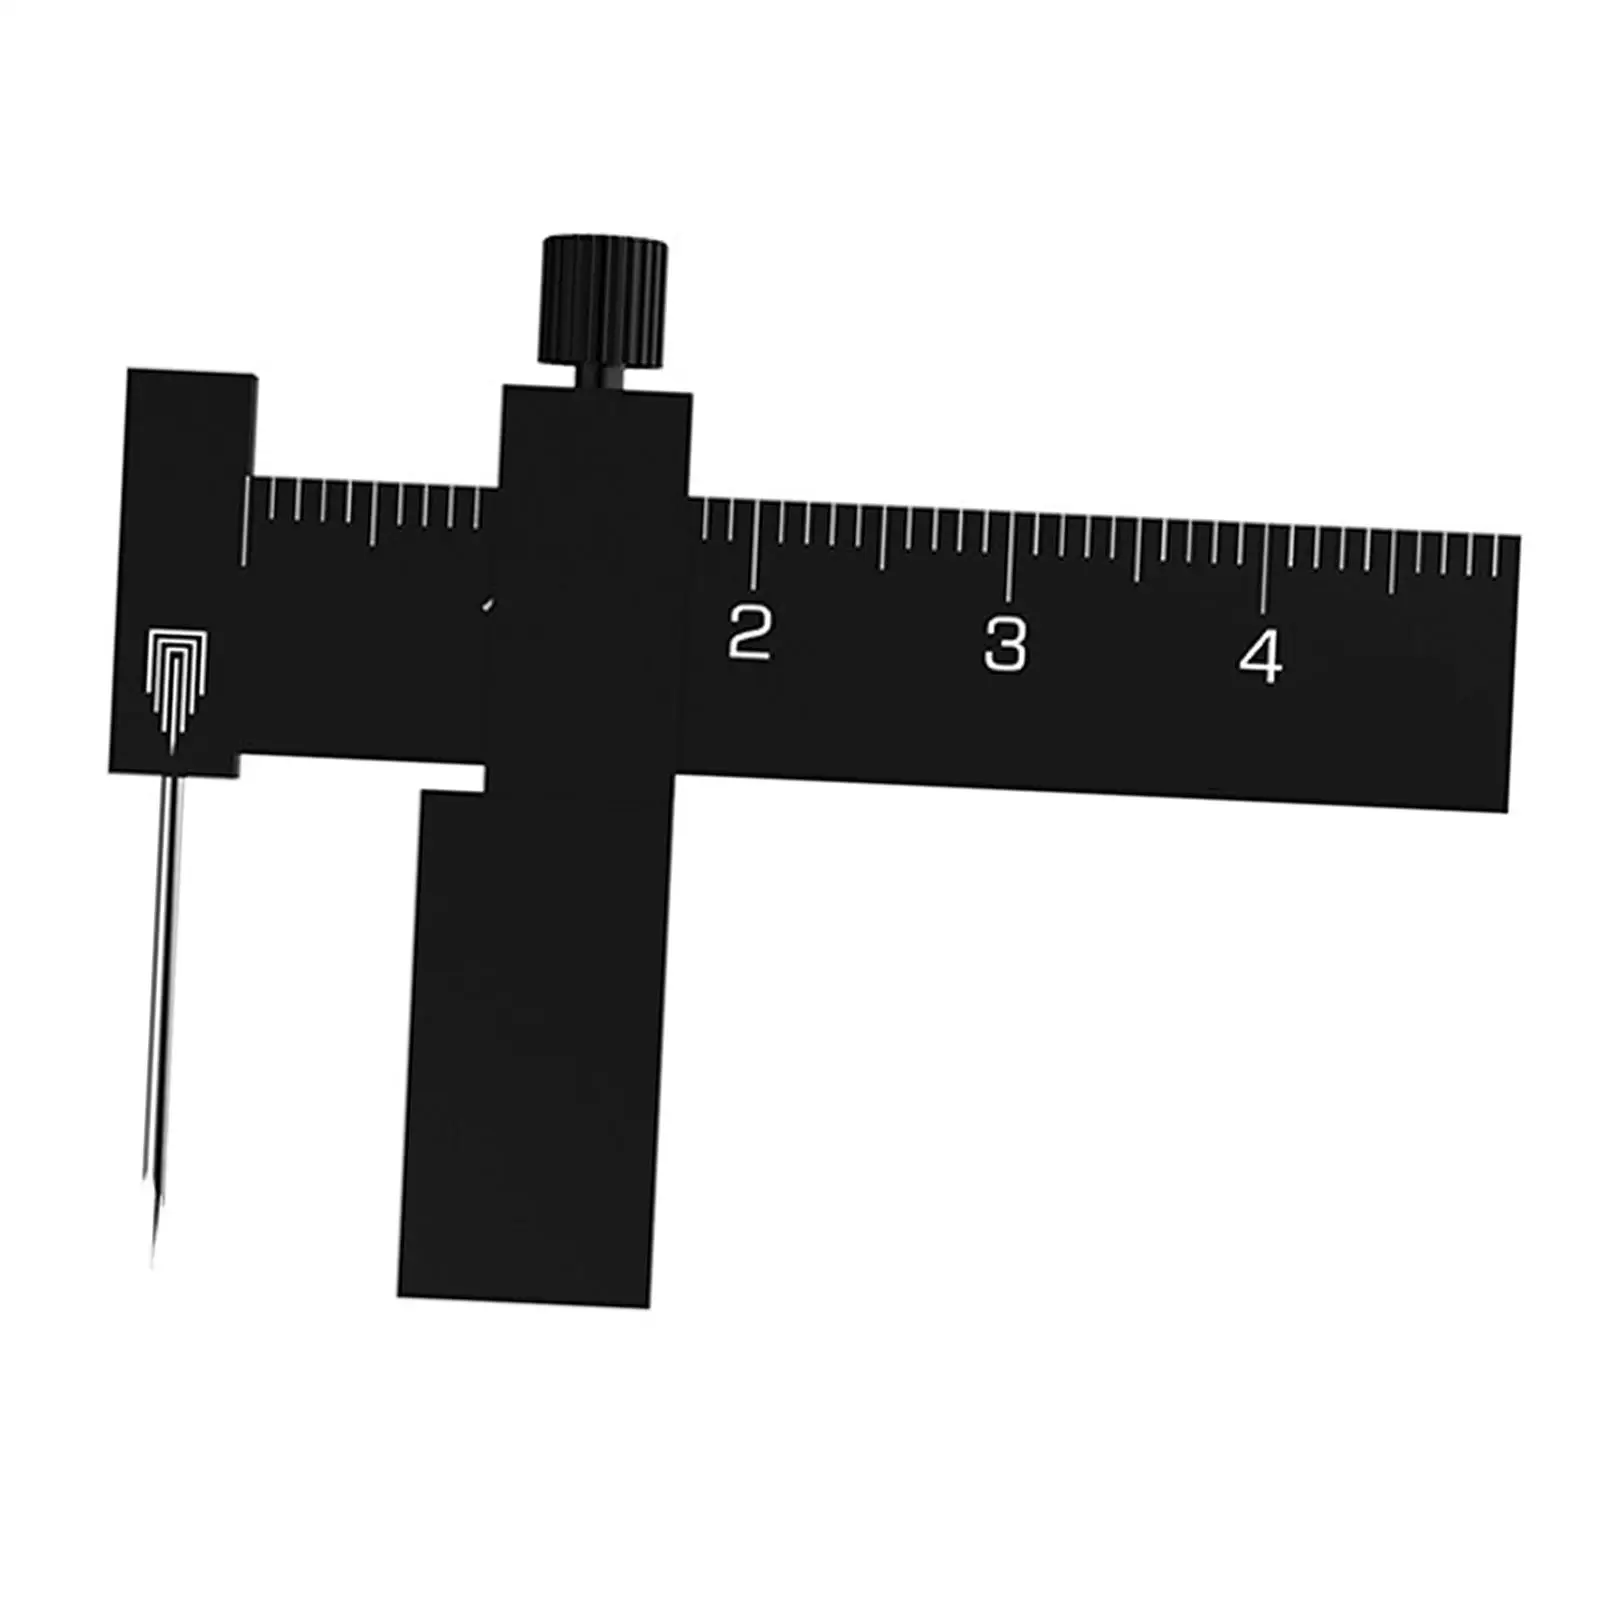 Equidistant Parallel Scriber Engraving Ruler T14A02 T14A03 DIY for Scale Model Modeler Craft Tool Drafting Crafting Woodworking